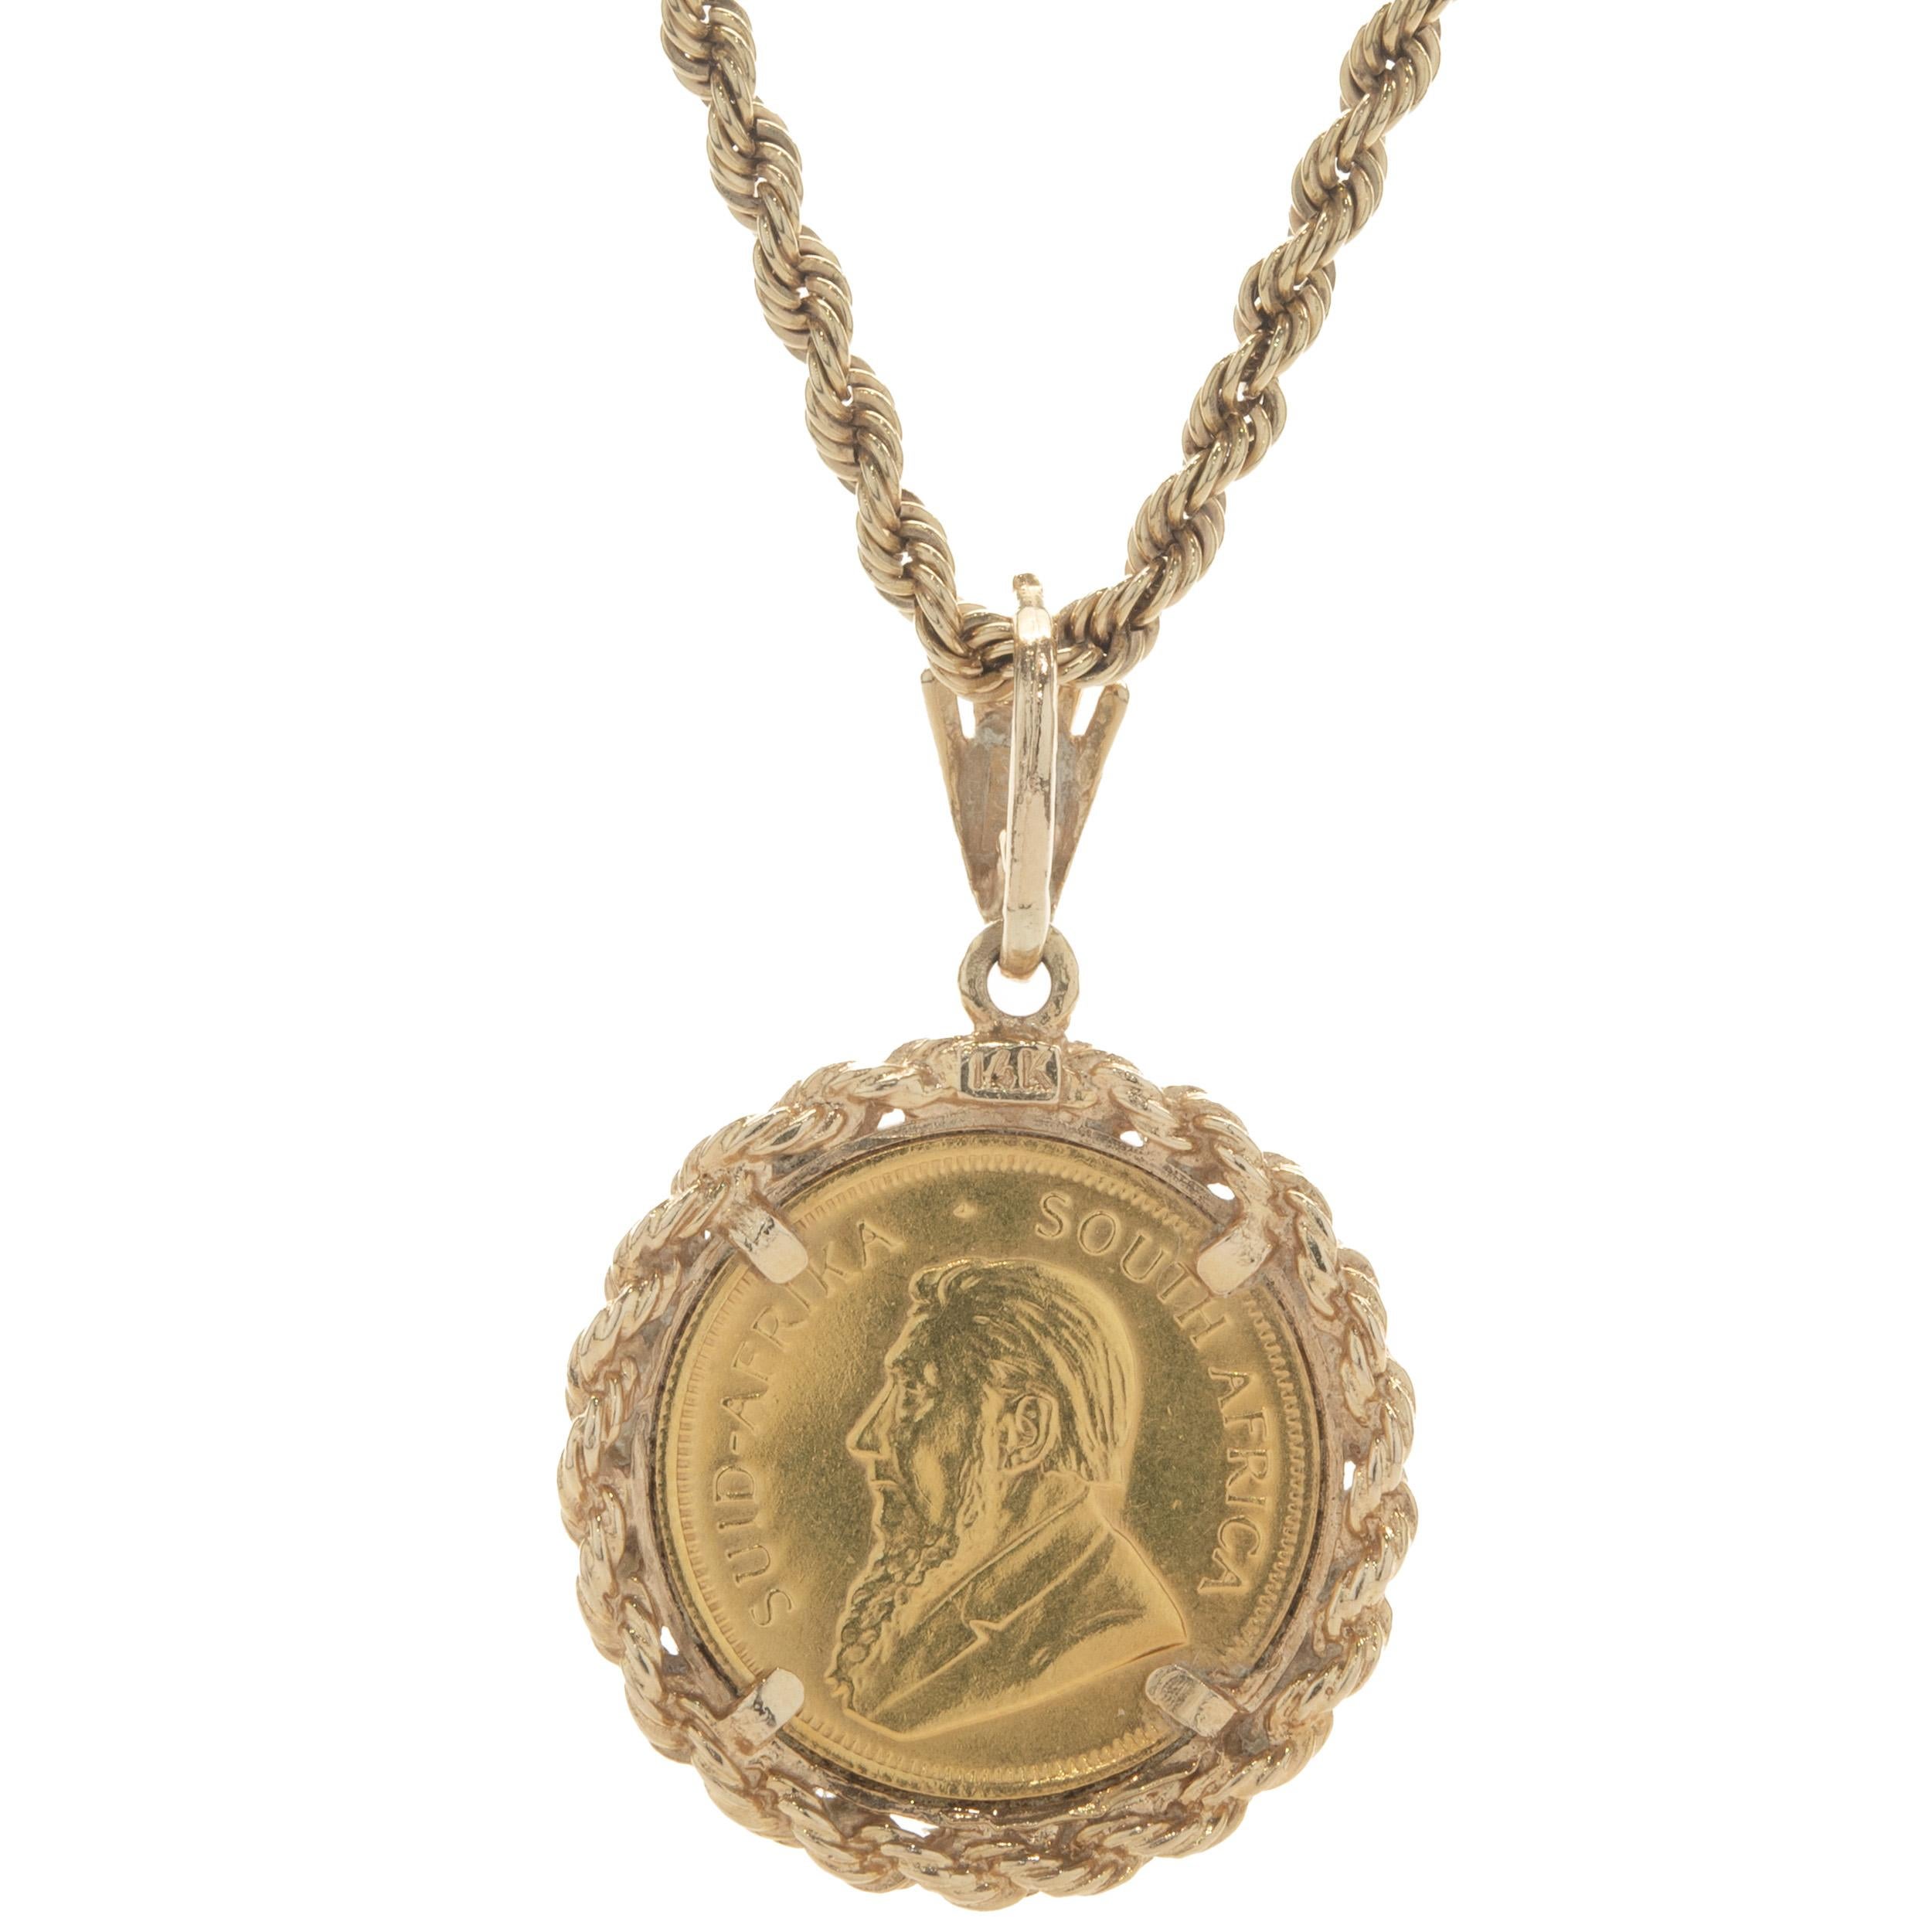 Material: Krugerrand / 14K yellow gold
Dimensions: necklace measures 20-inches in length
Weight: 31.00 grams